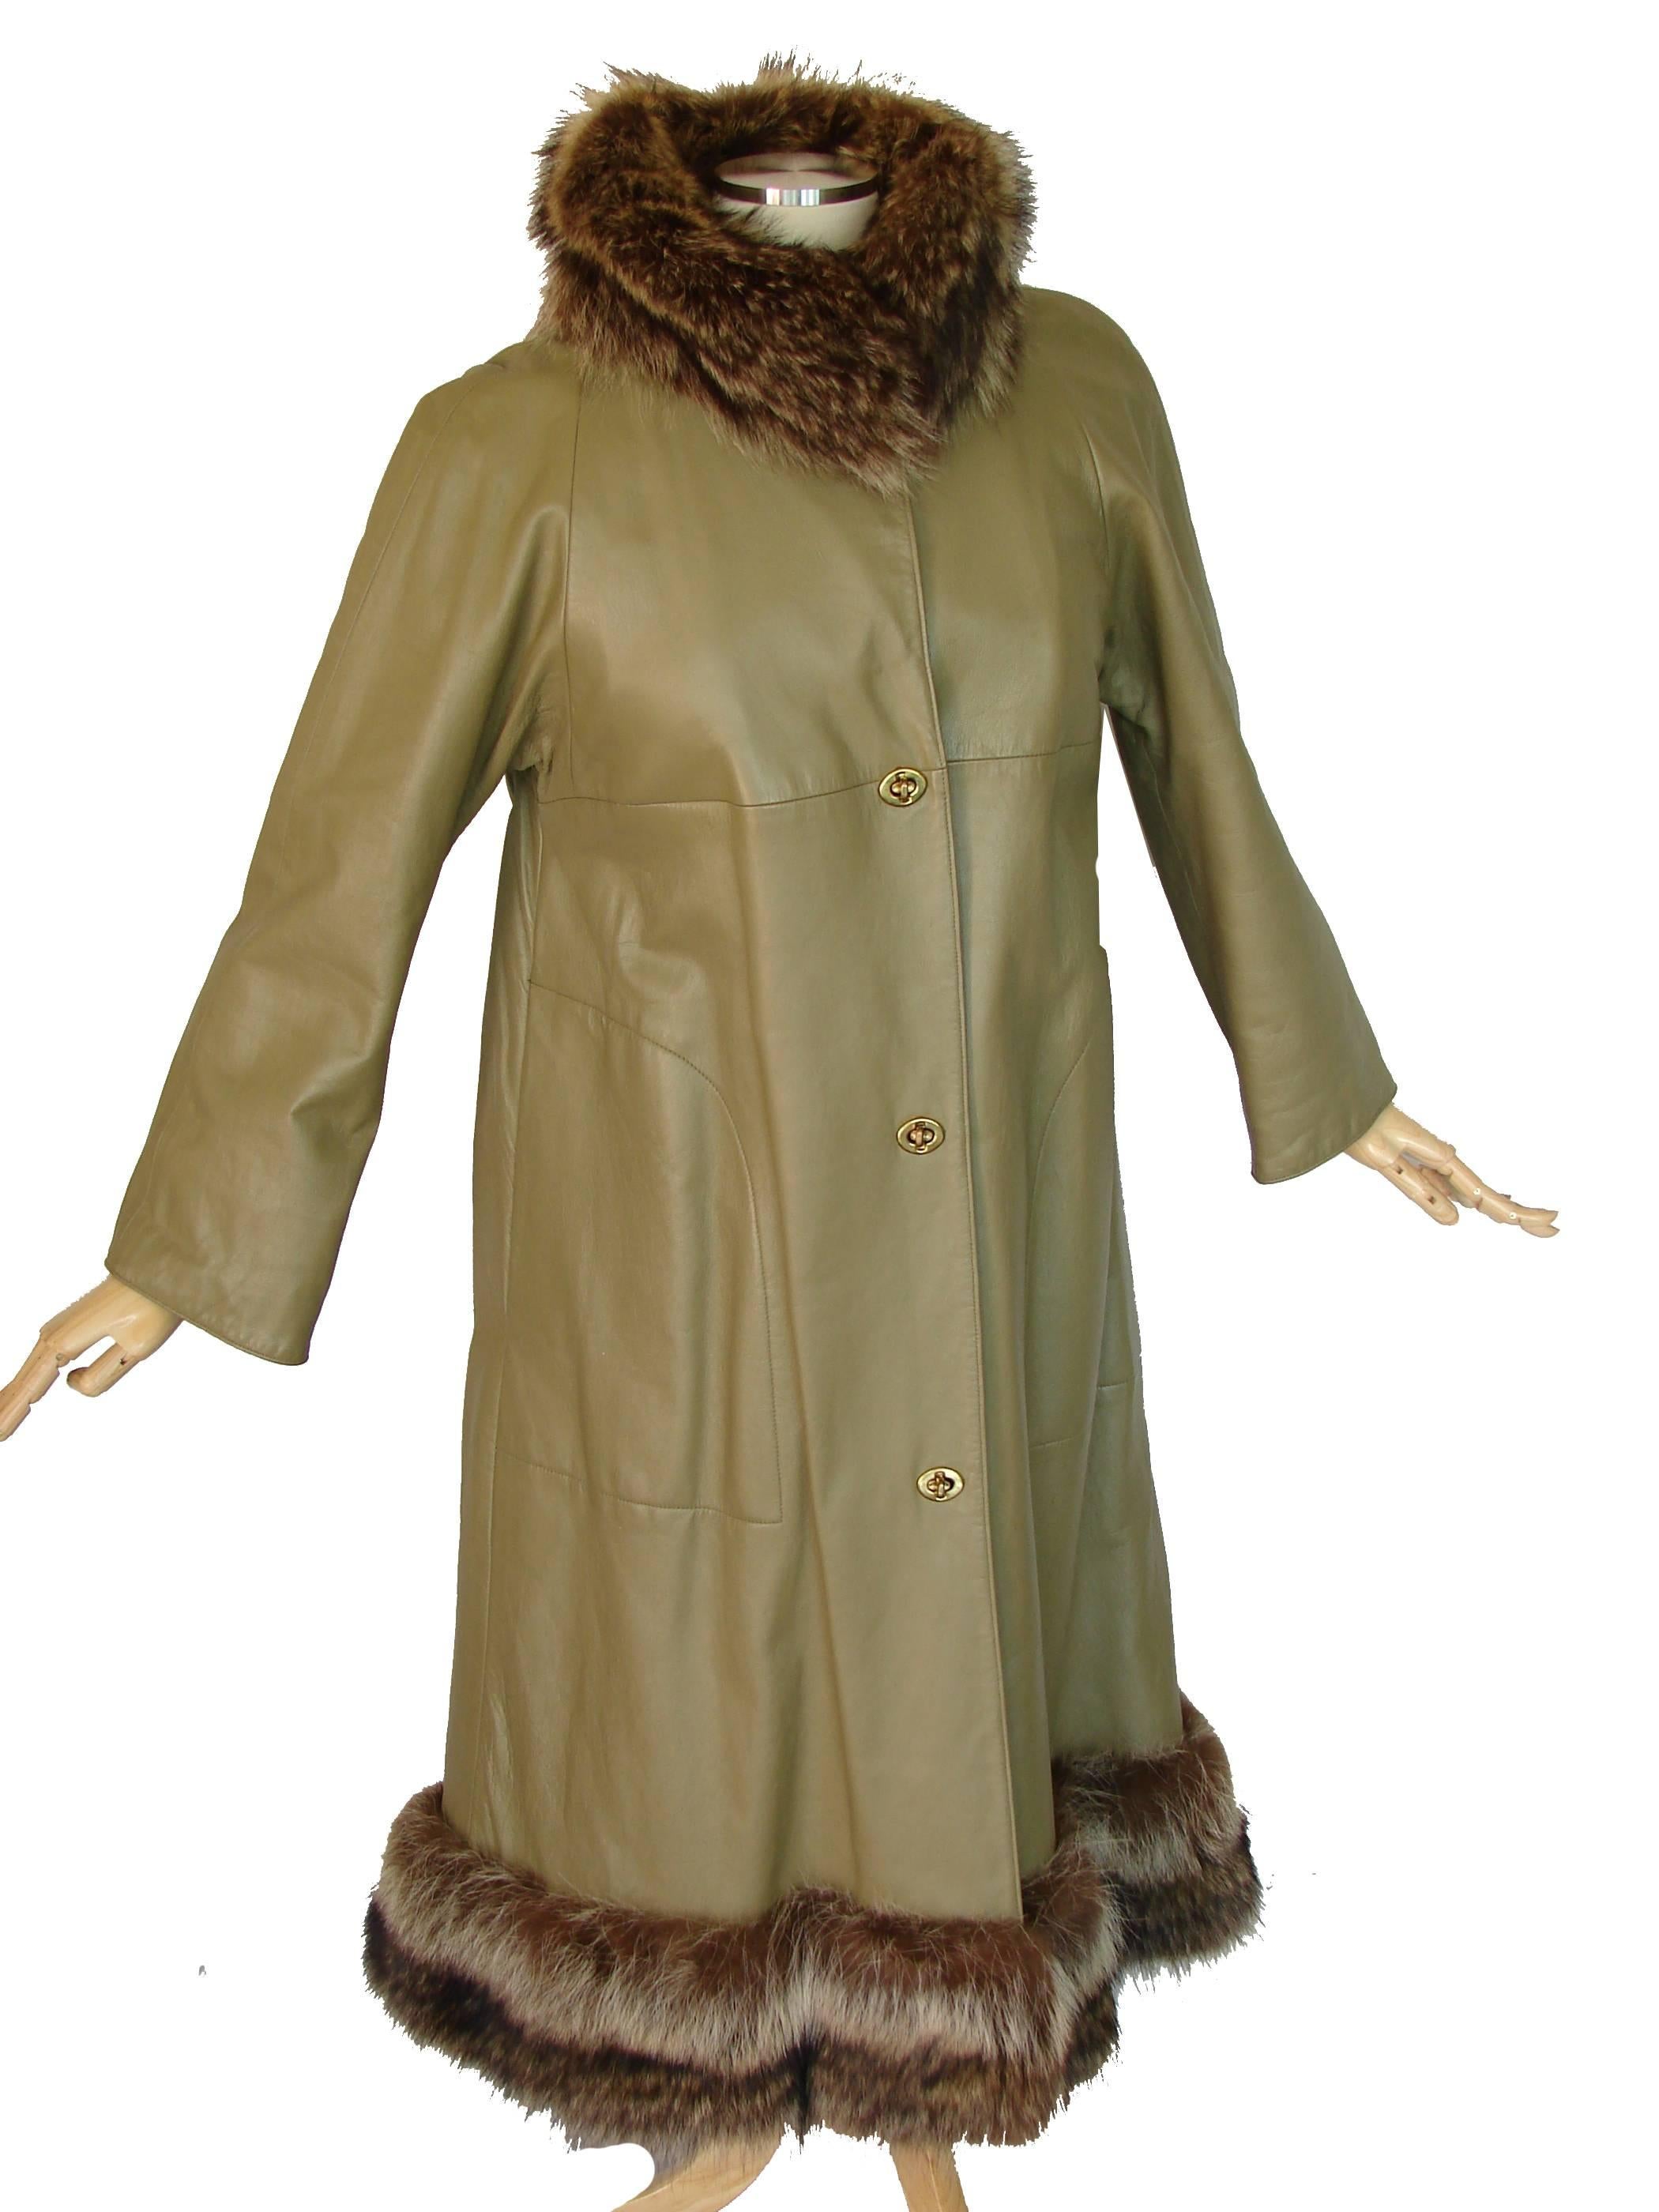 This fabulous coat was designed by the mother of American sportswear, Bonnie Cashin in the 1960s.  Made from a light olive colored Angola leather, it features raccoon fur trim at the collar and hem.  Lined in faux fur fabric.  Fastens with Bonnie's